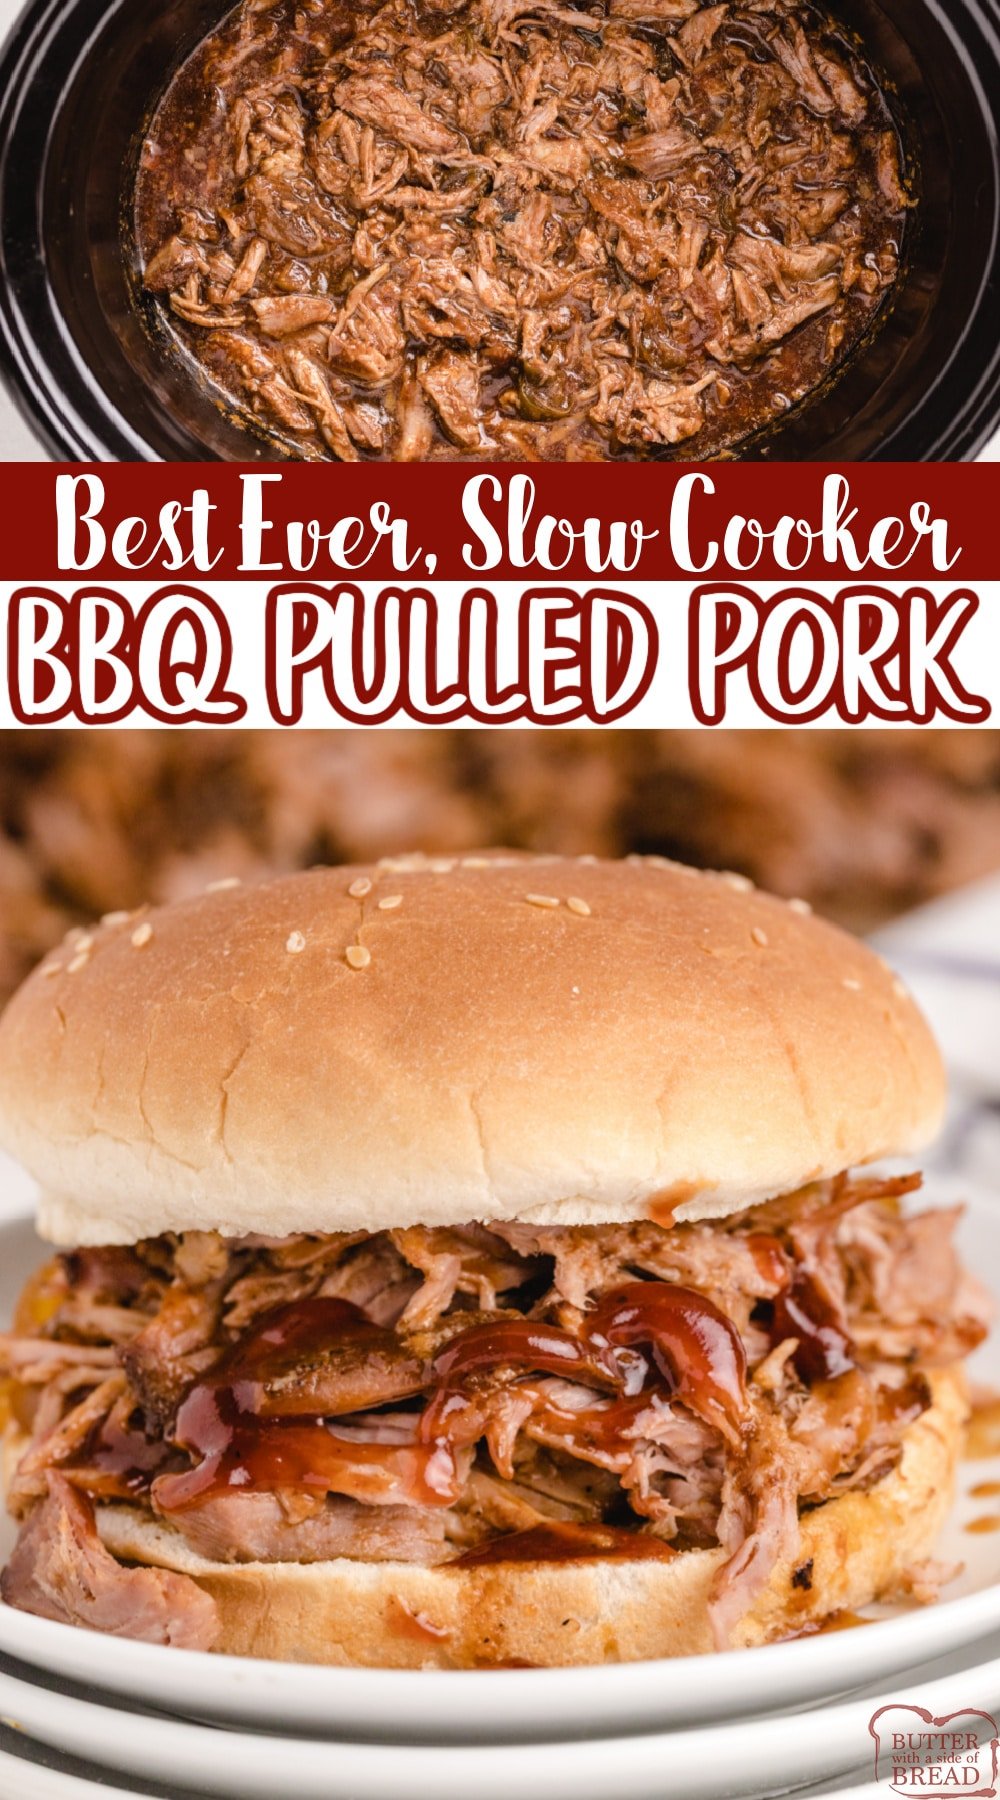 Best EVER Slow Cooker BBQ Pulled Pork! It's moist, tender and packed with flavor! This simple crockpot pulled pork recipe is perfect for making sandwiches or just serving over rice.